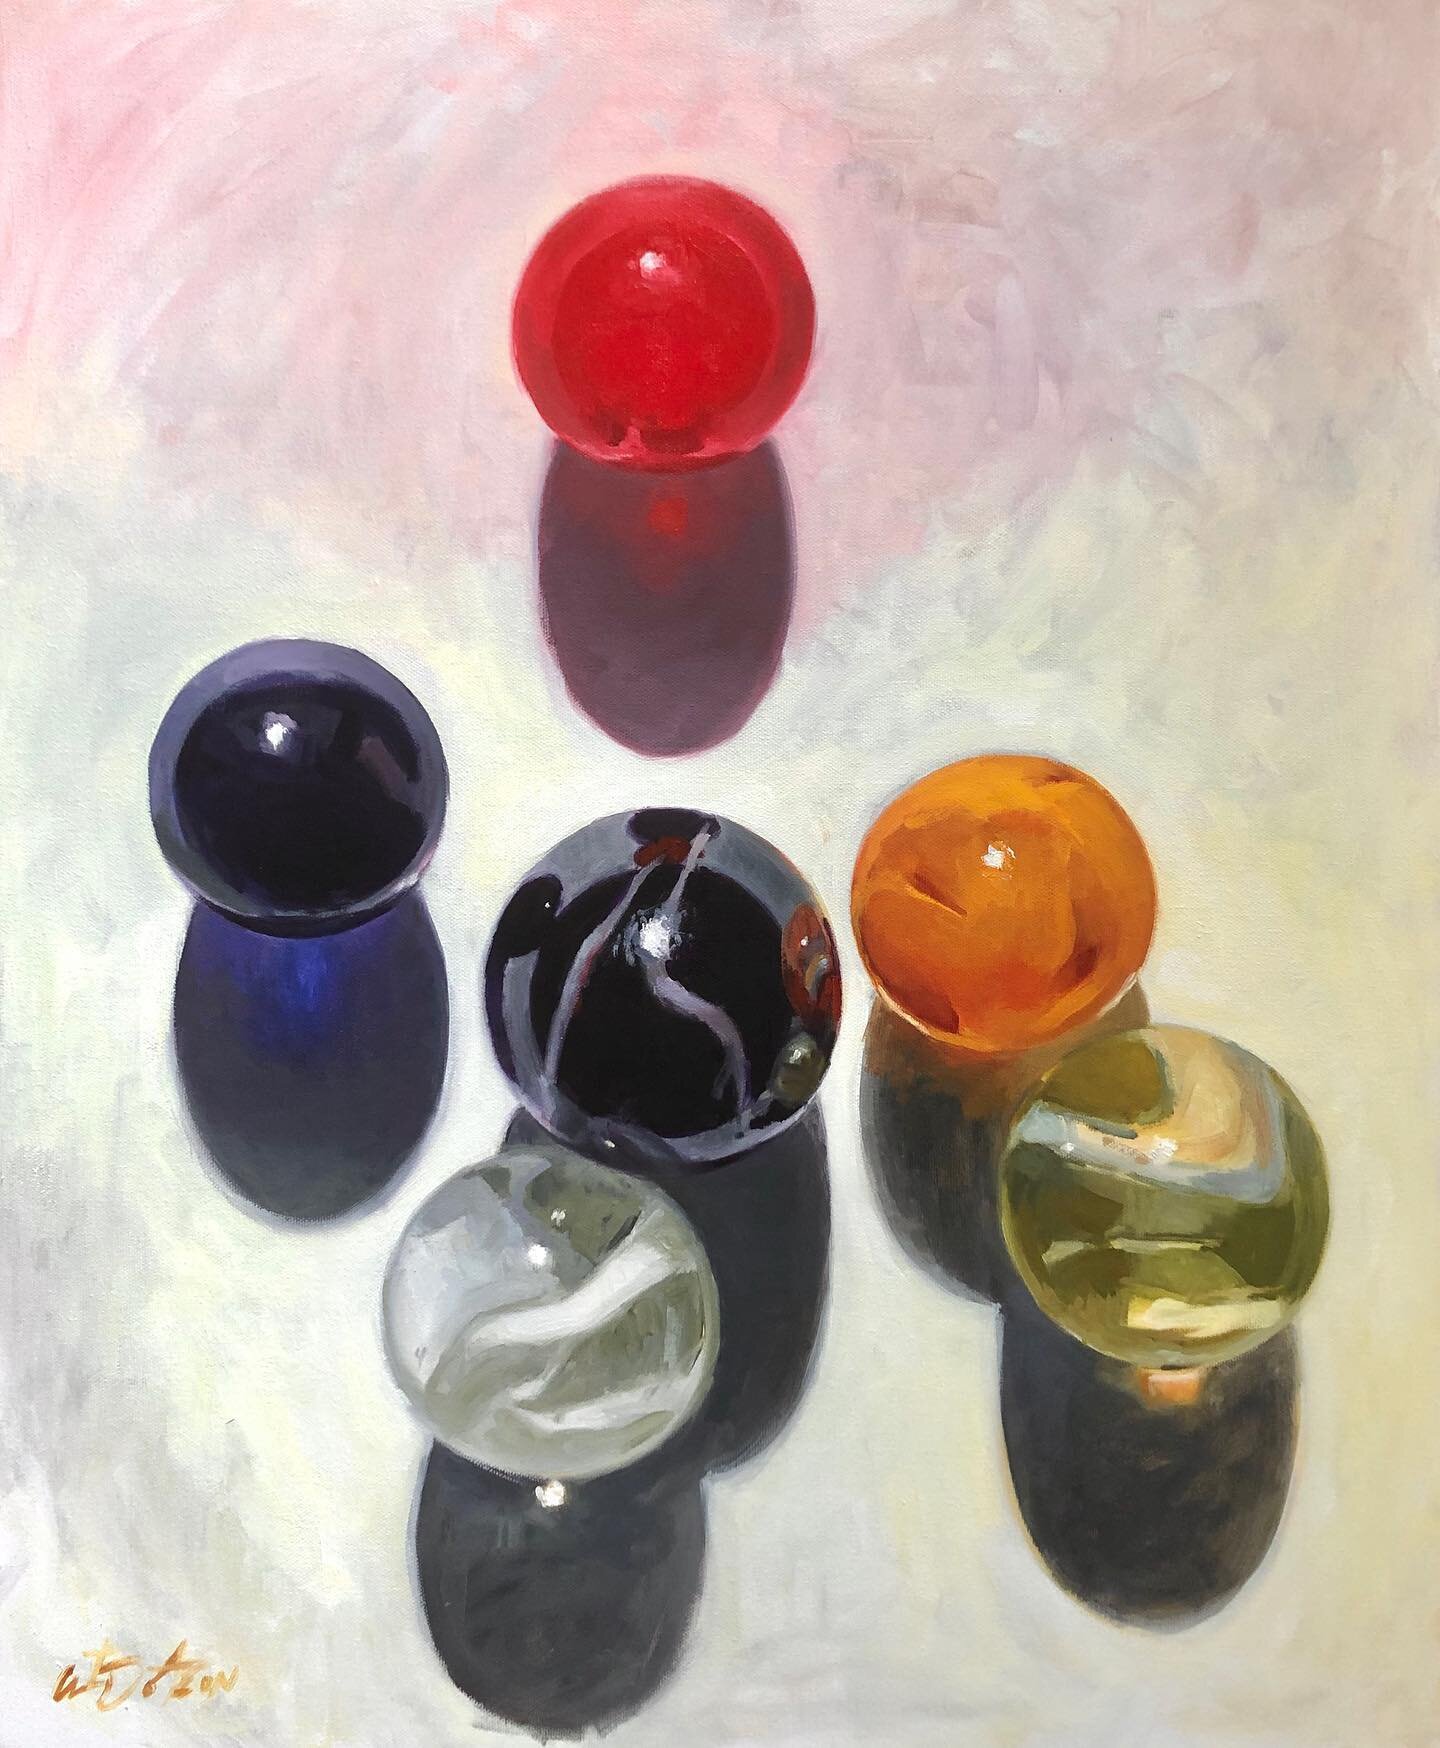 Six Marbles